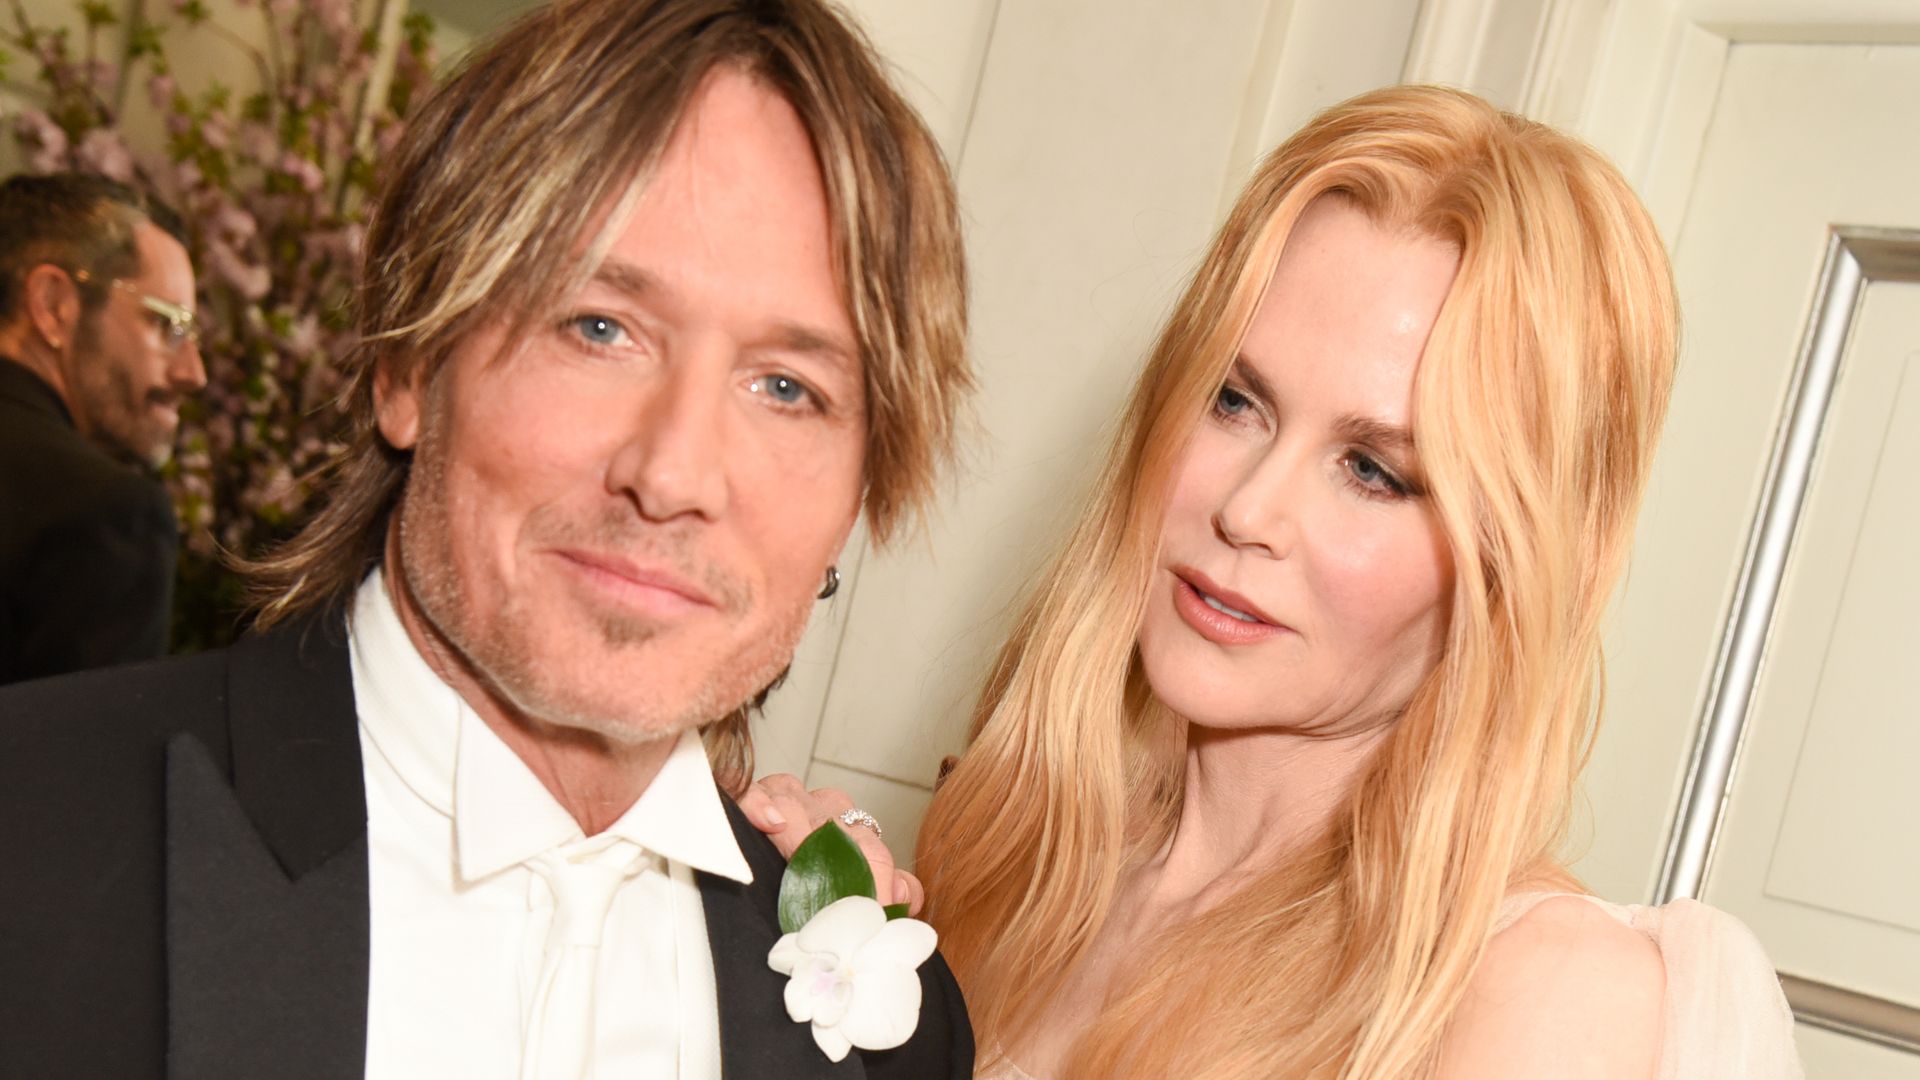 Nicole Kidman's unconventional marriage rule with Keith Urban he's tried to break